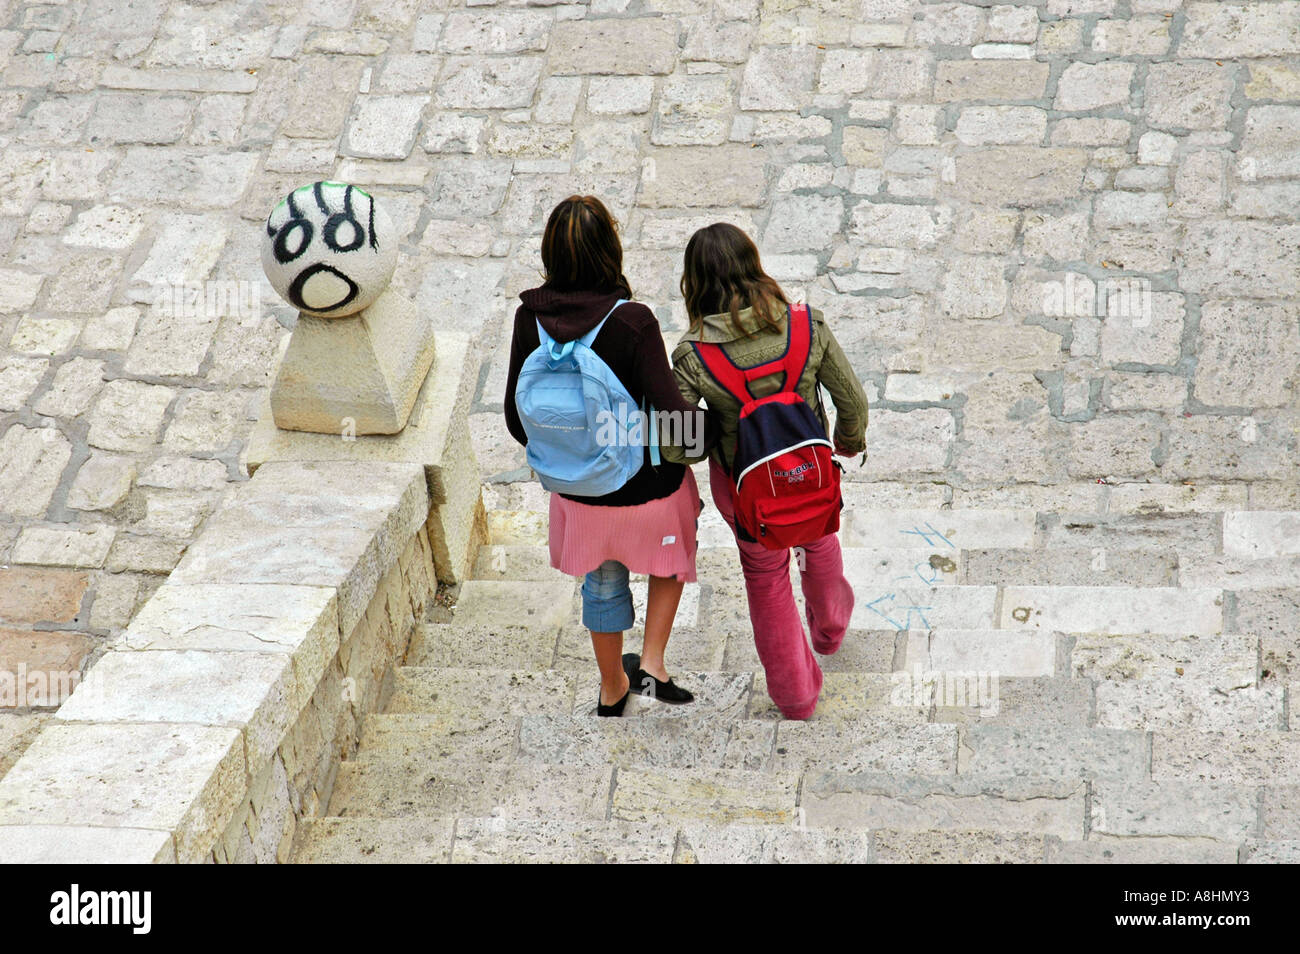 School kids with rucksack going down stairs, two friends, Graffiti, Alicante, Spain Stock Photo